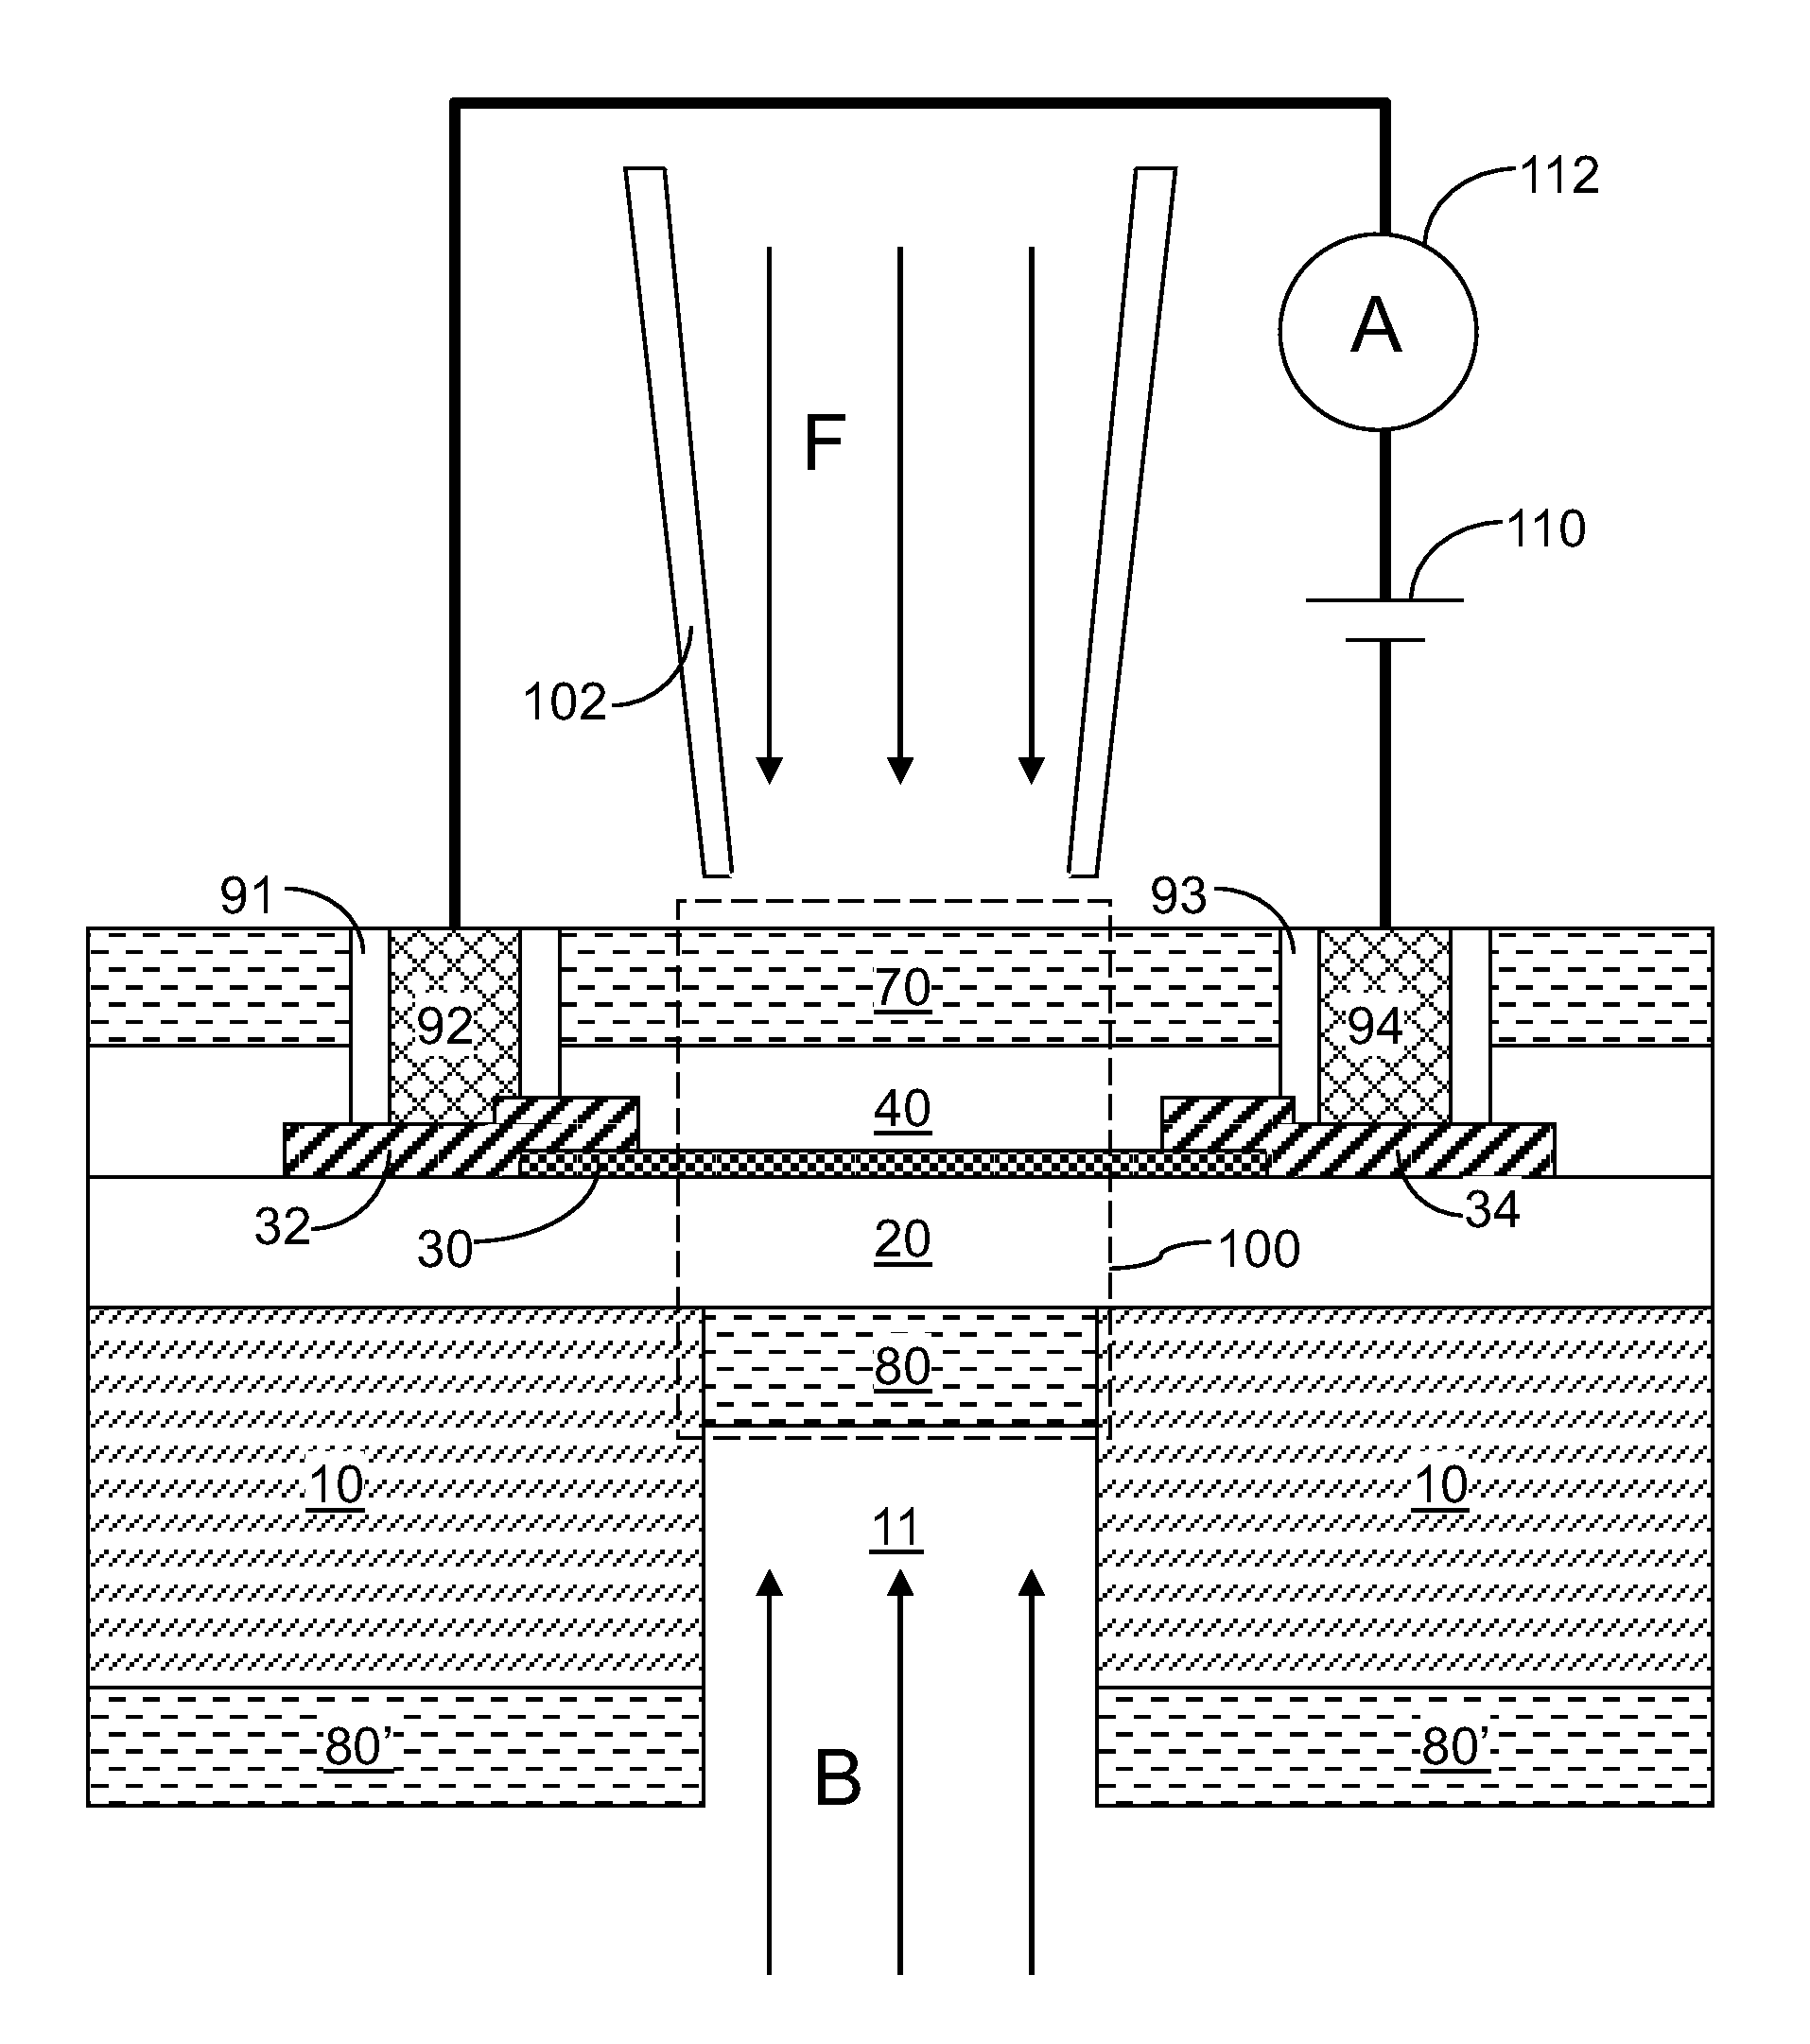 Optoelectronic device employing a microcavity including a two-dimensional carbon lattice structure